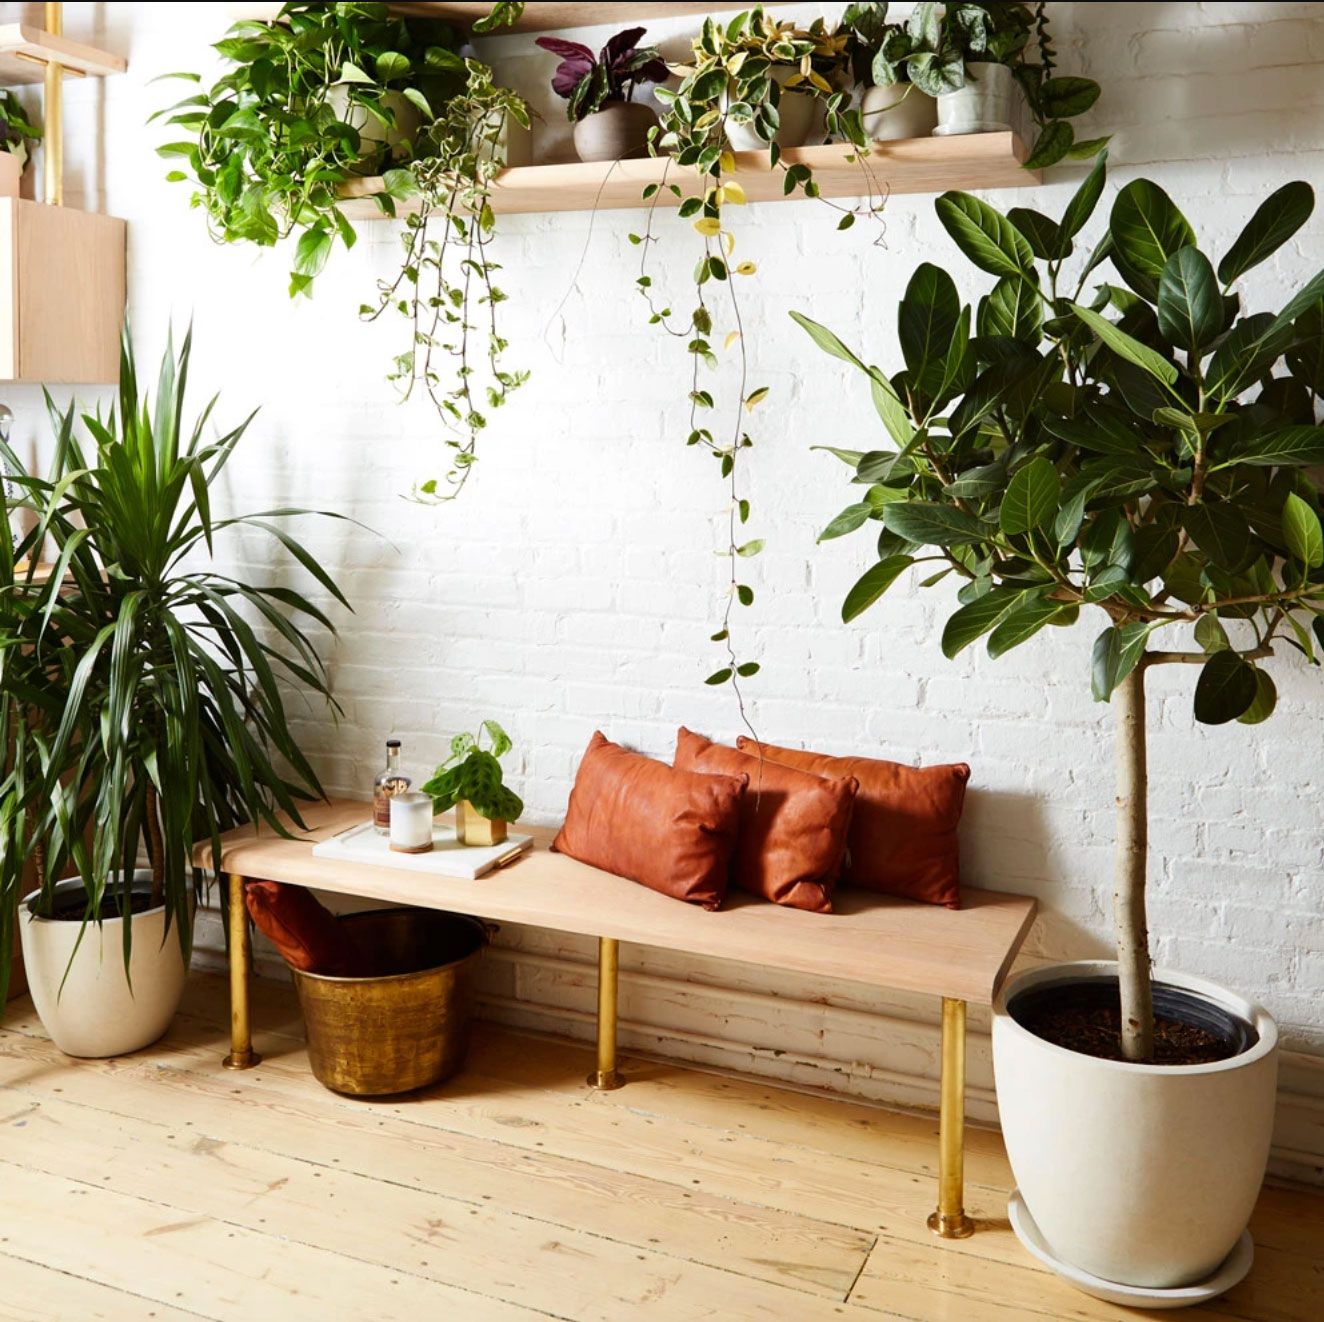 Do you really need a humidifier for your indoor plants? Experts